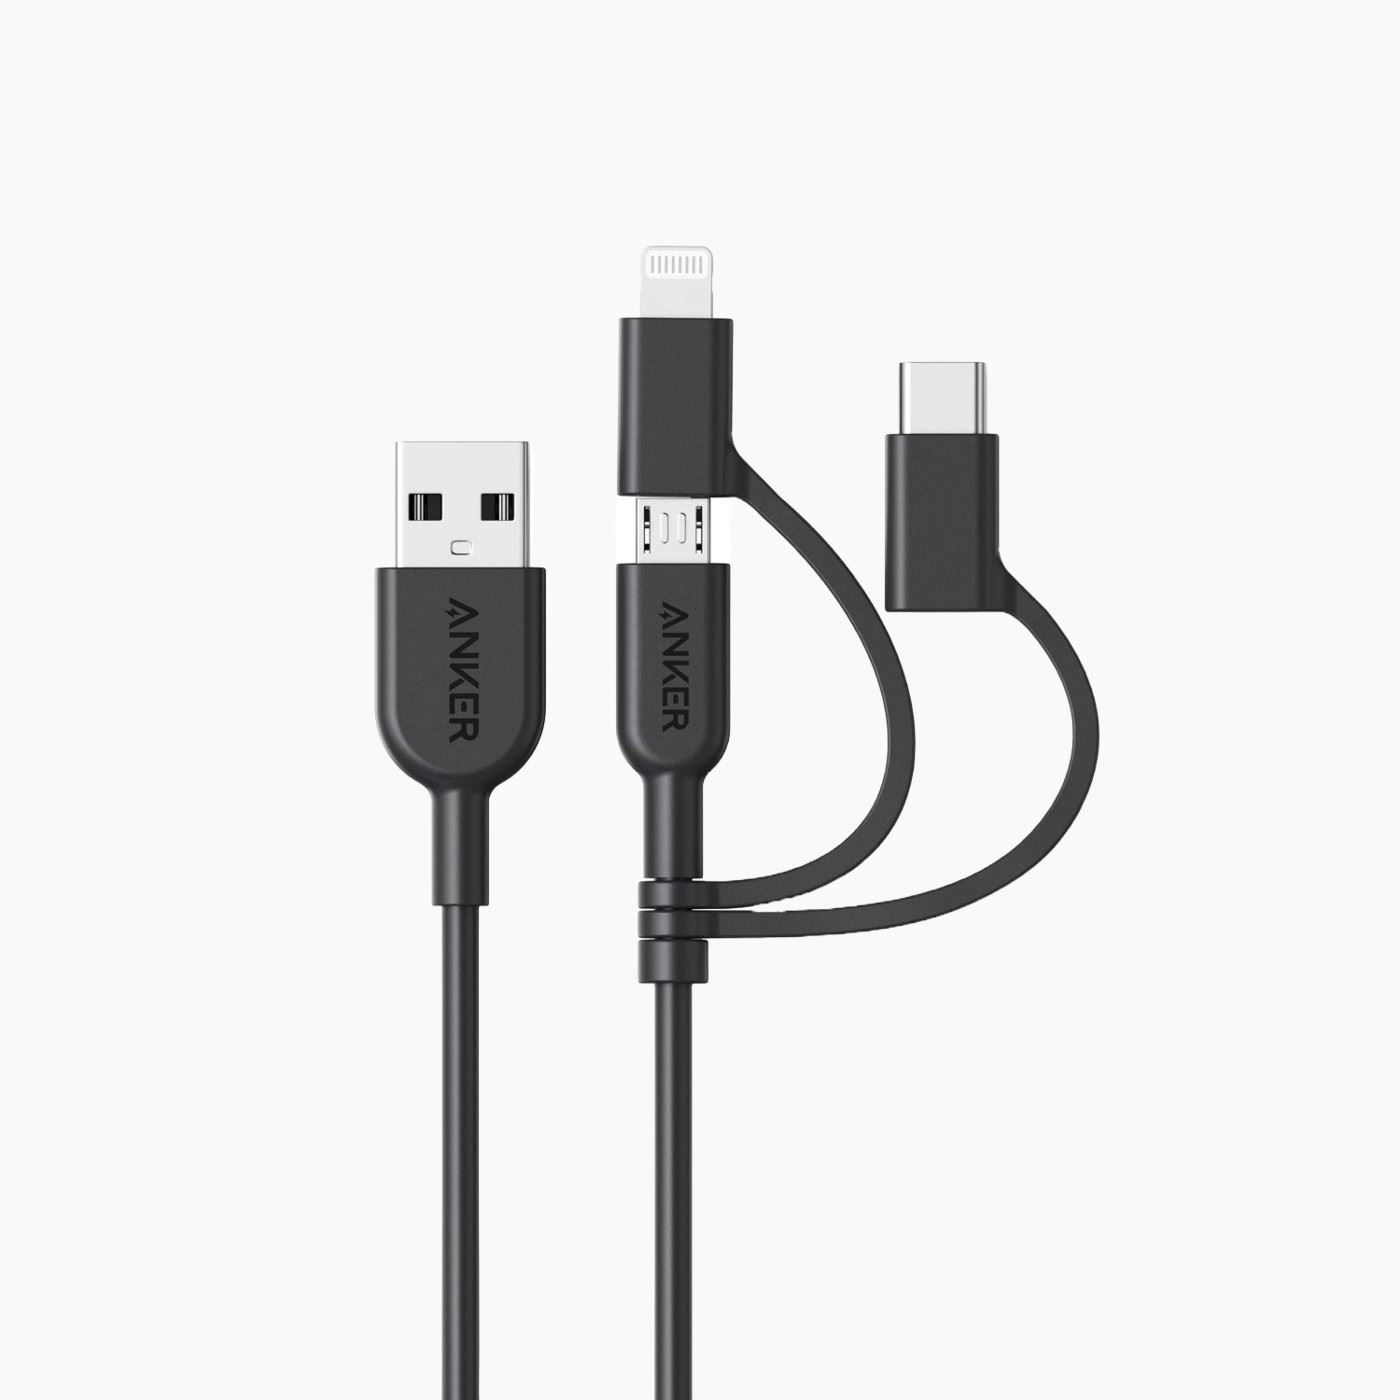 HGG22UNDER 50AnkerPowerlineII3 IN 1CHARGINGCABLE